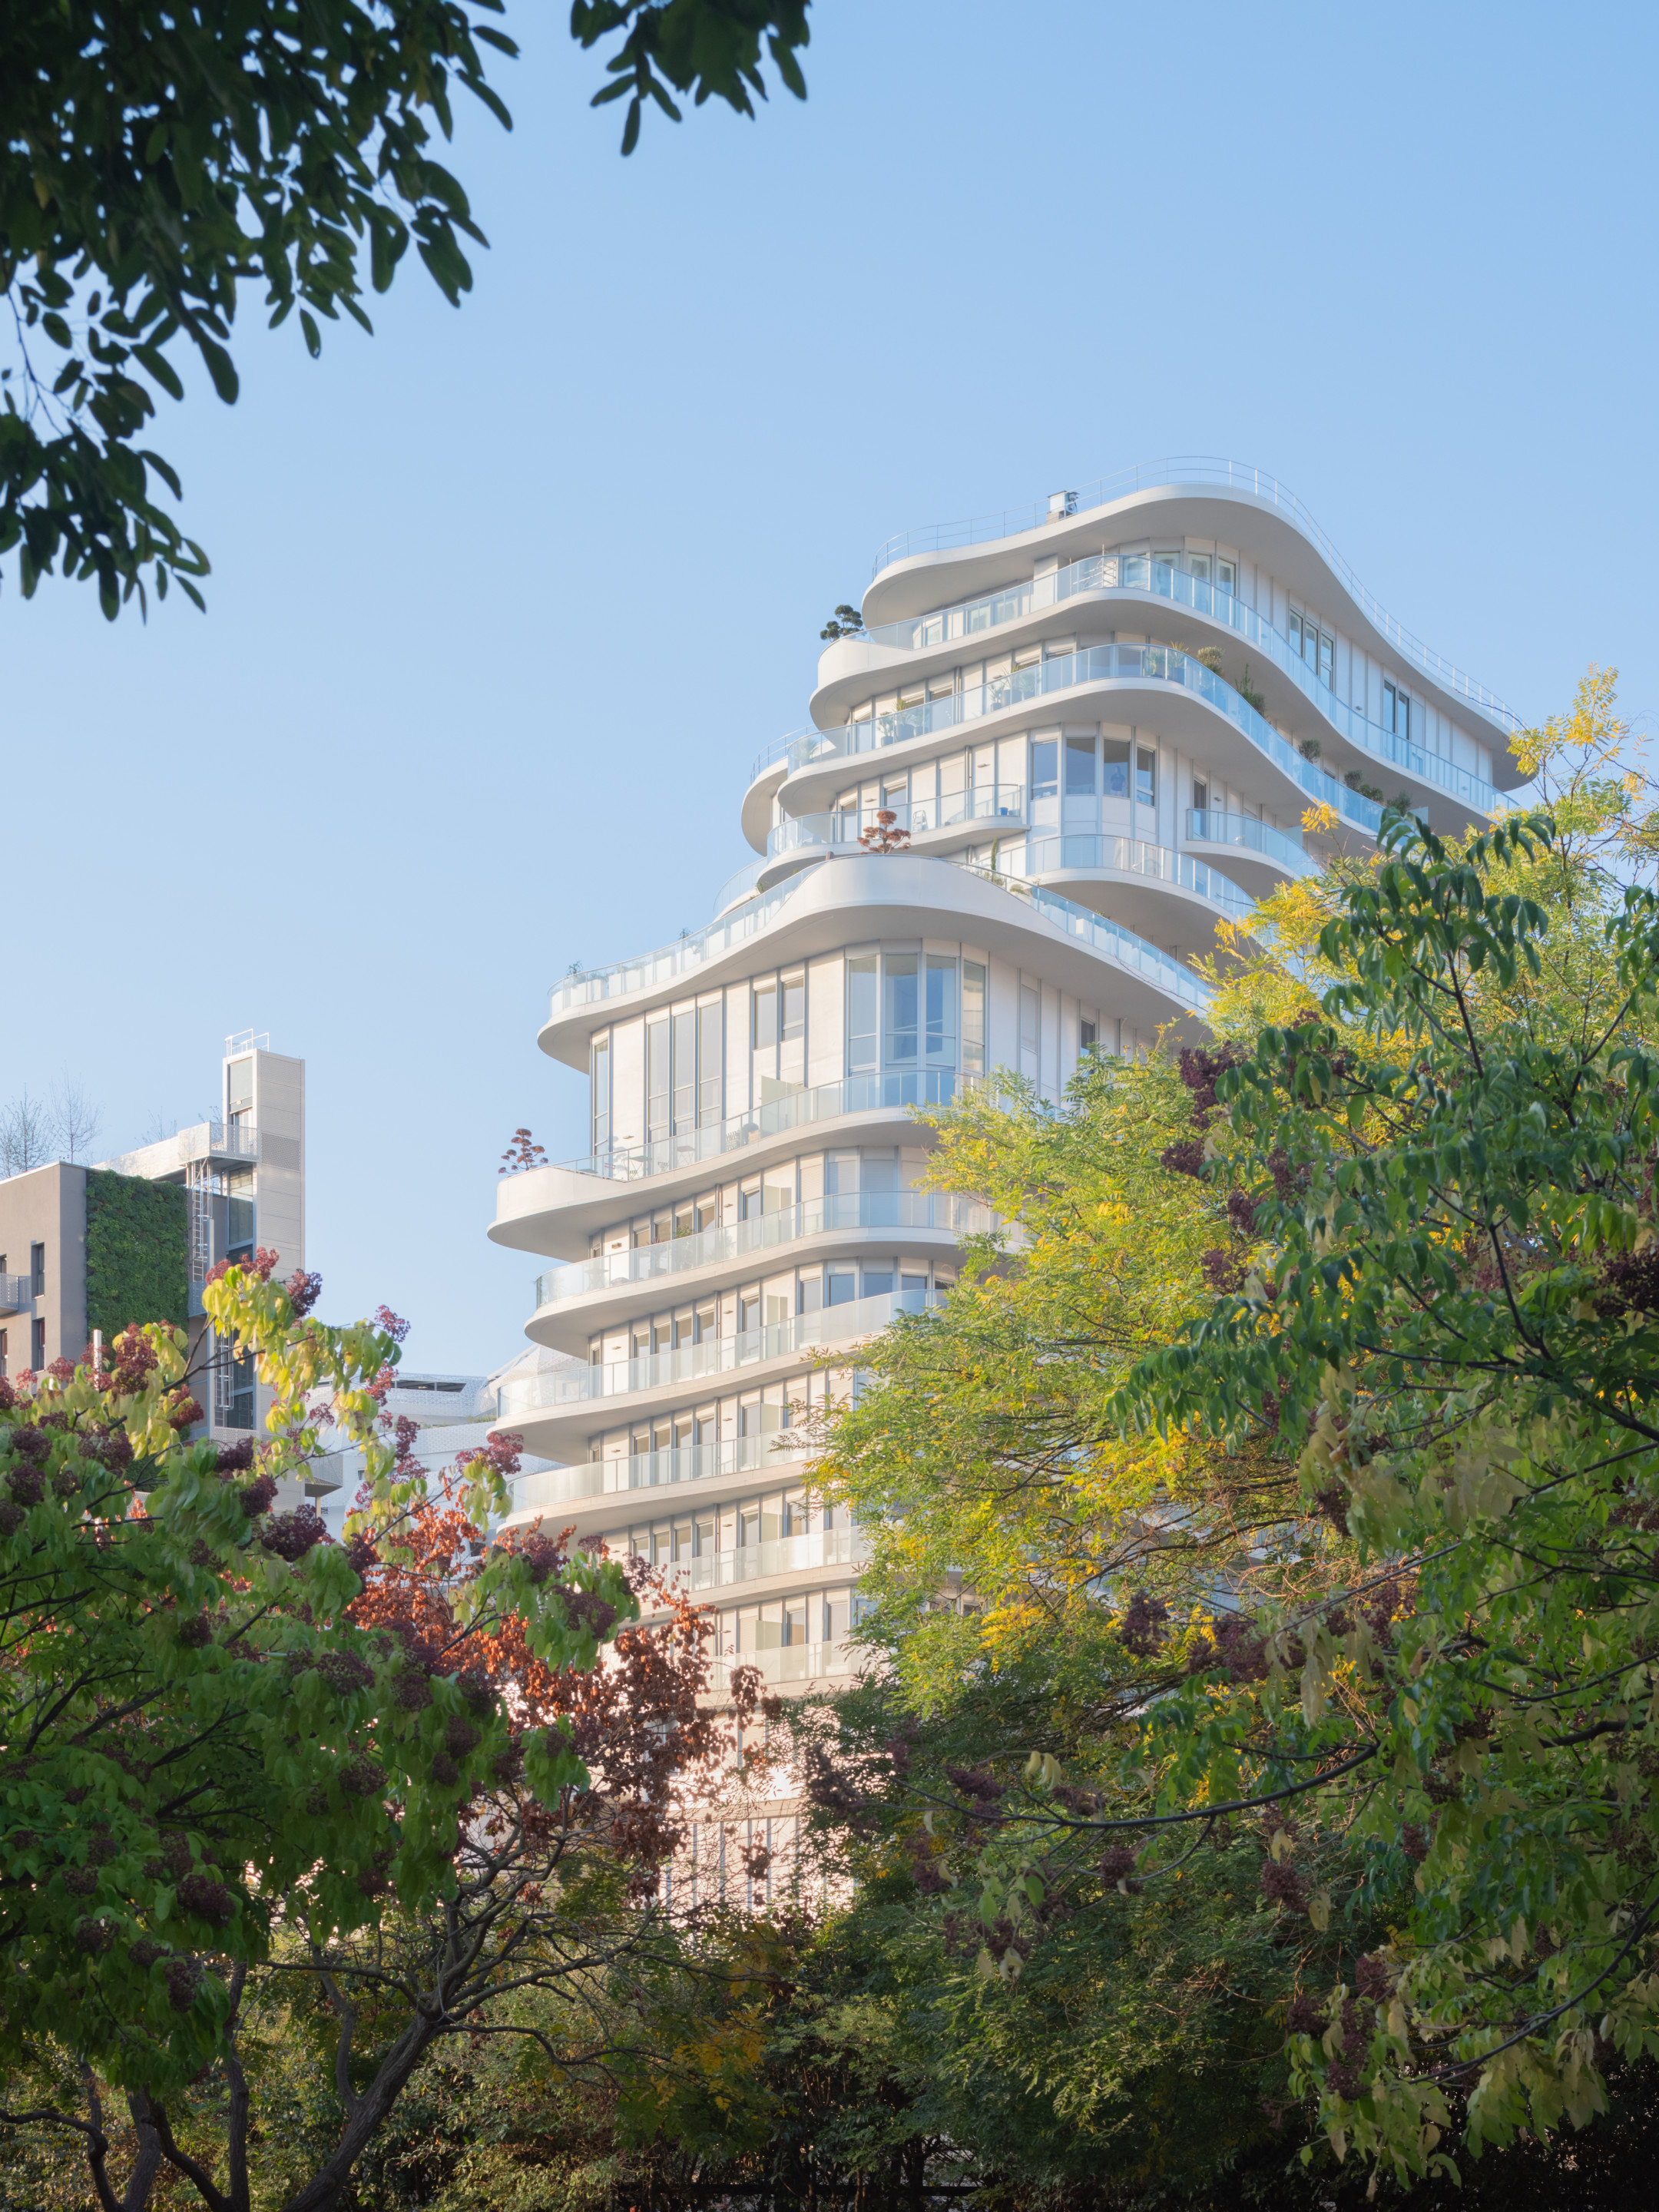 view of a balcony-wrapped apartment building through trees